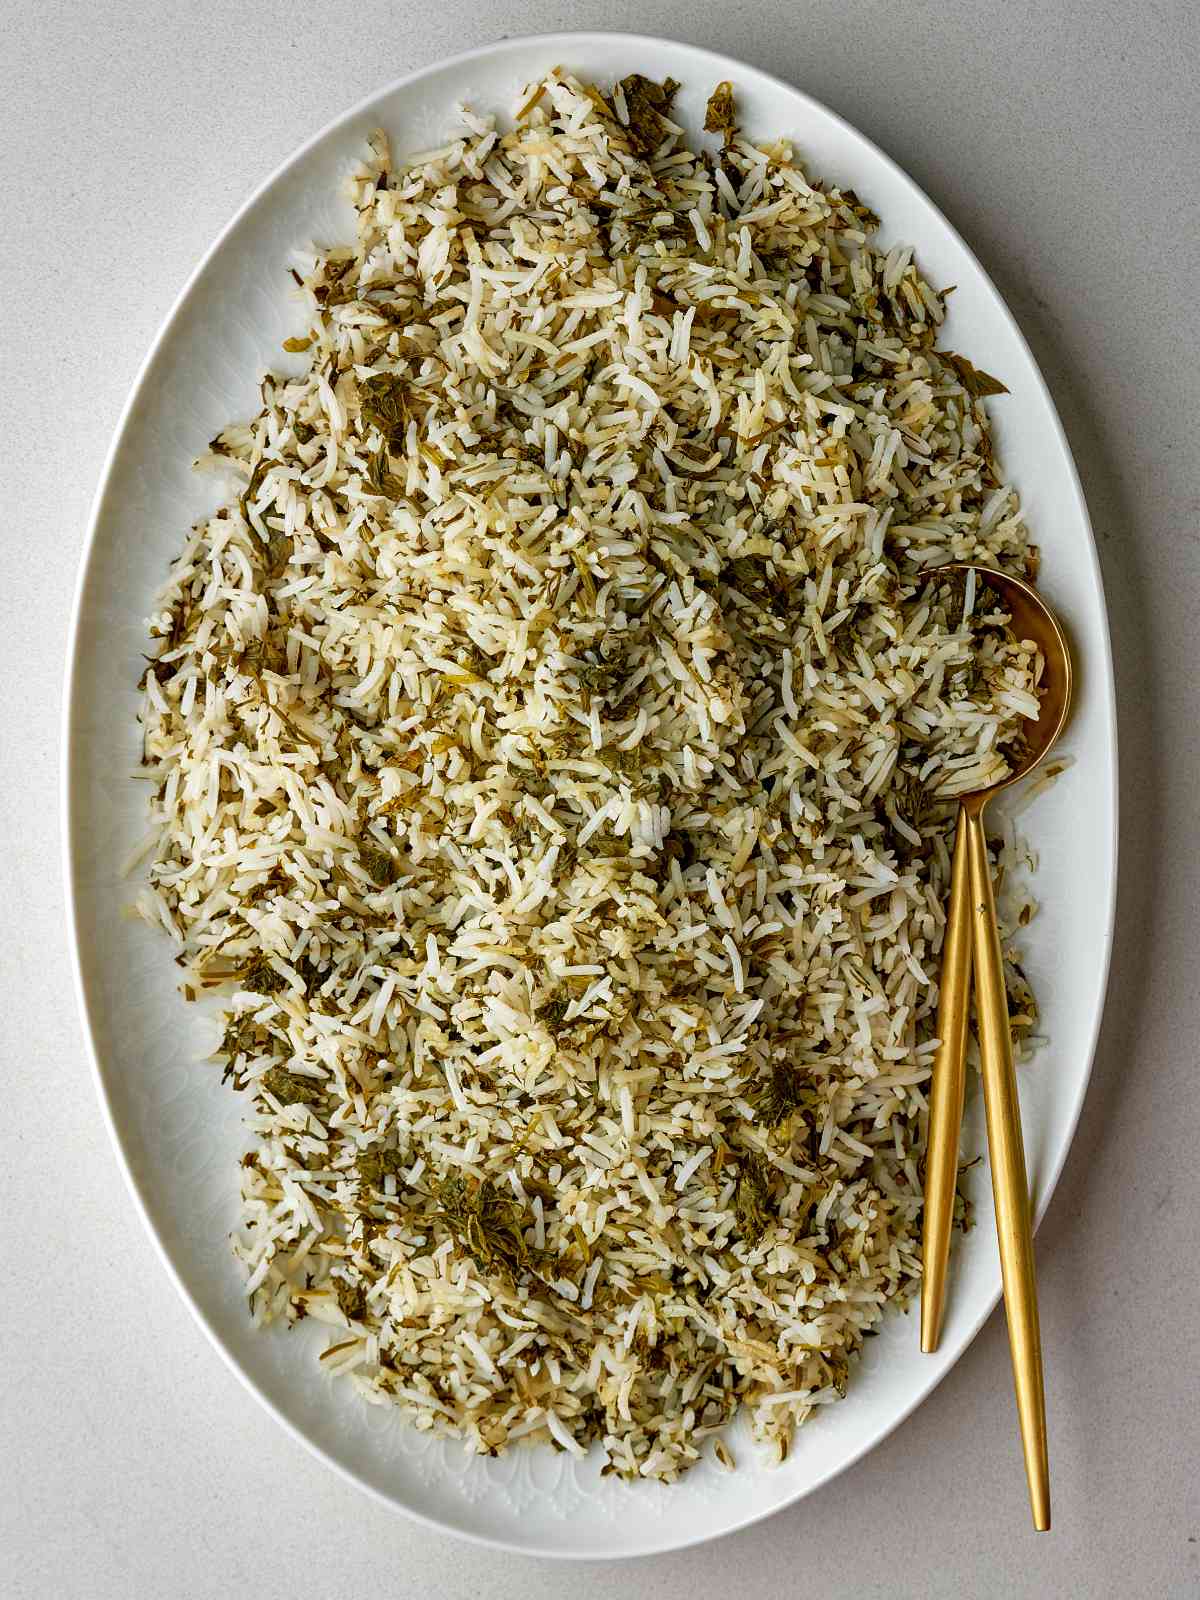 Rice mixed with herbs on an oval white platter with gold serving utensils.